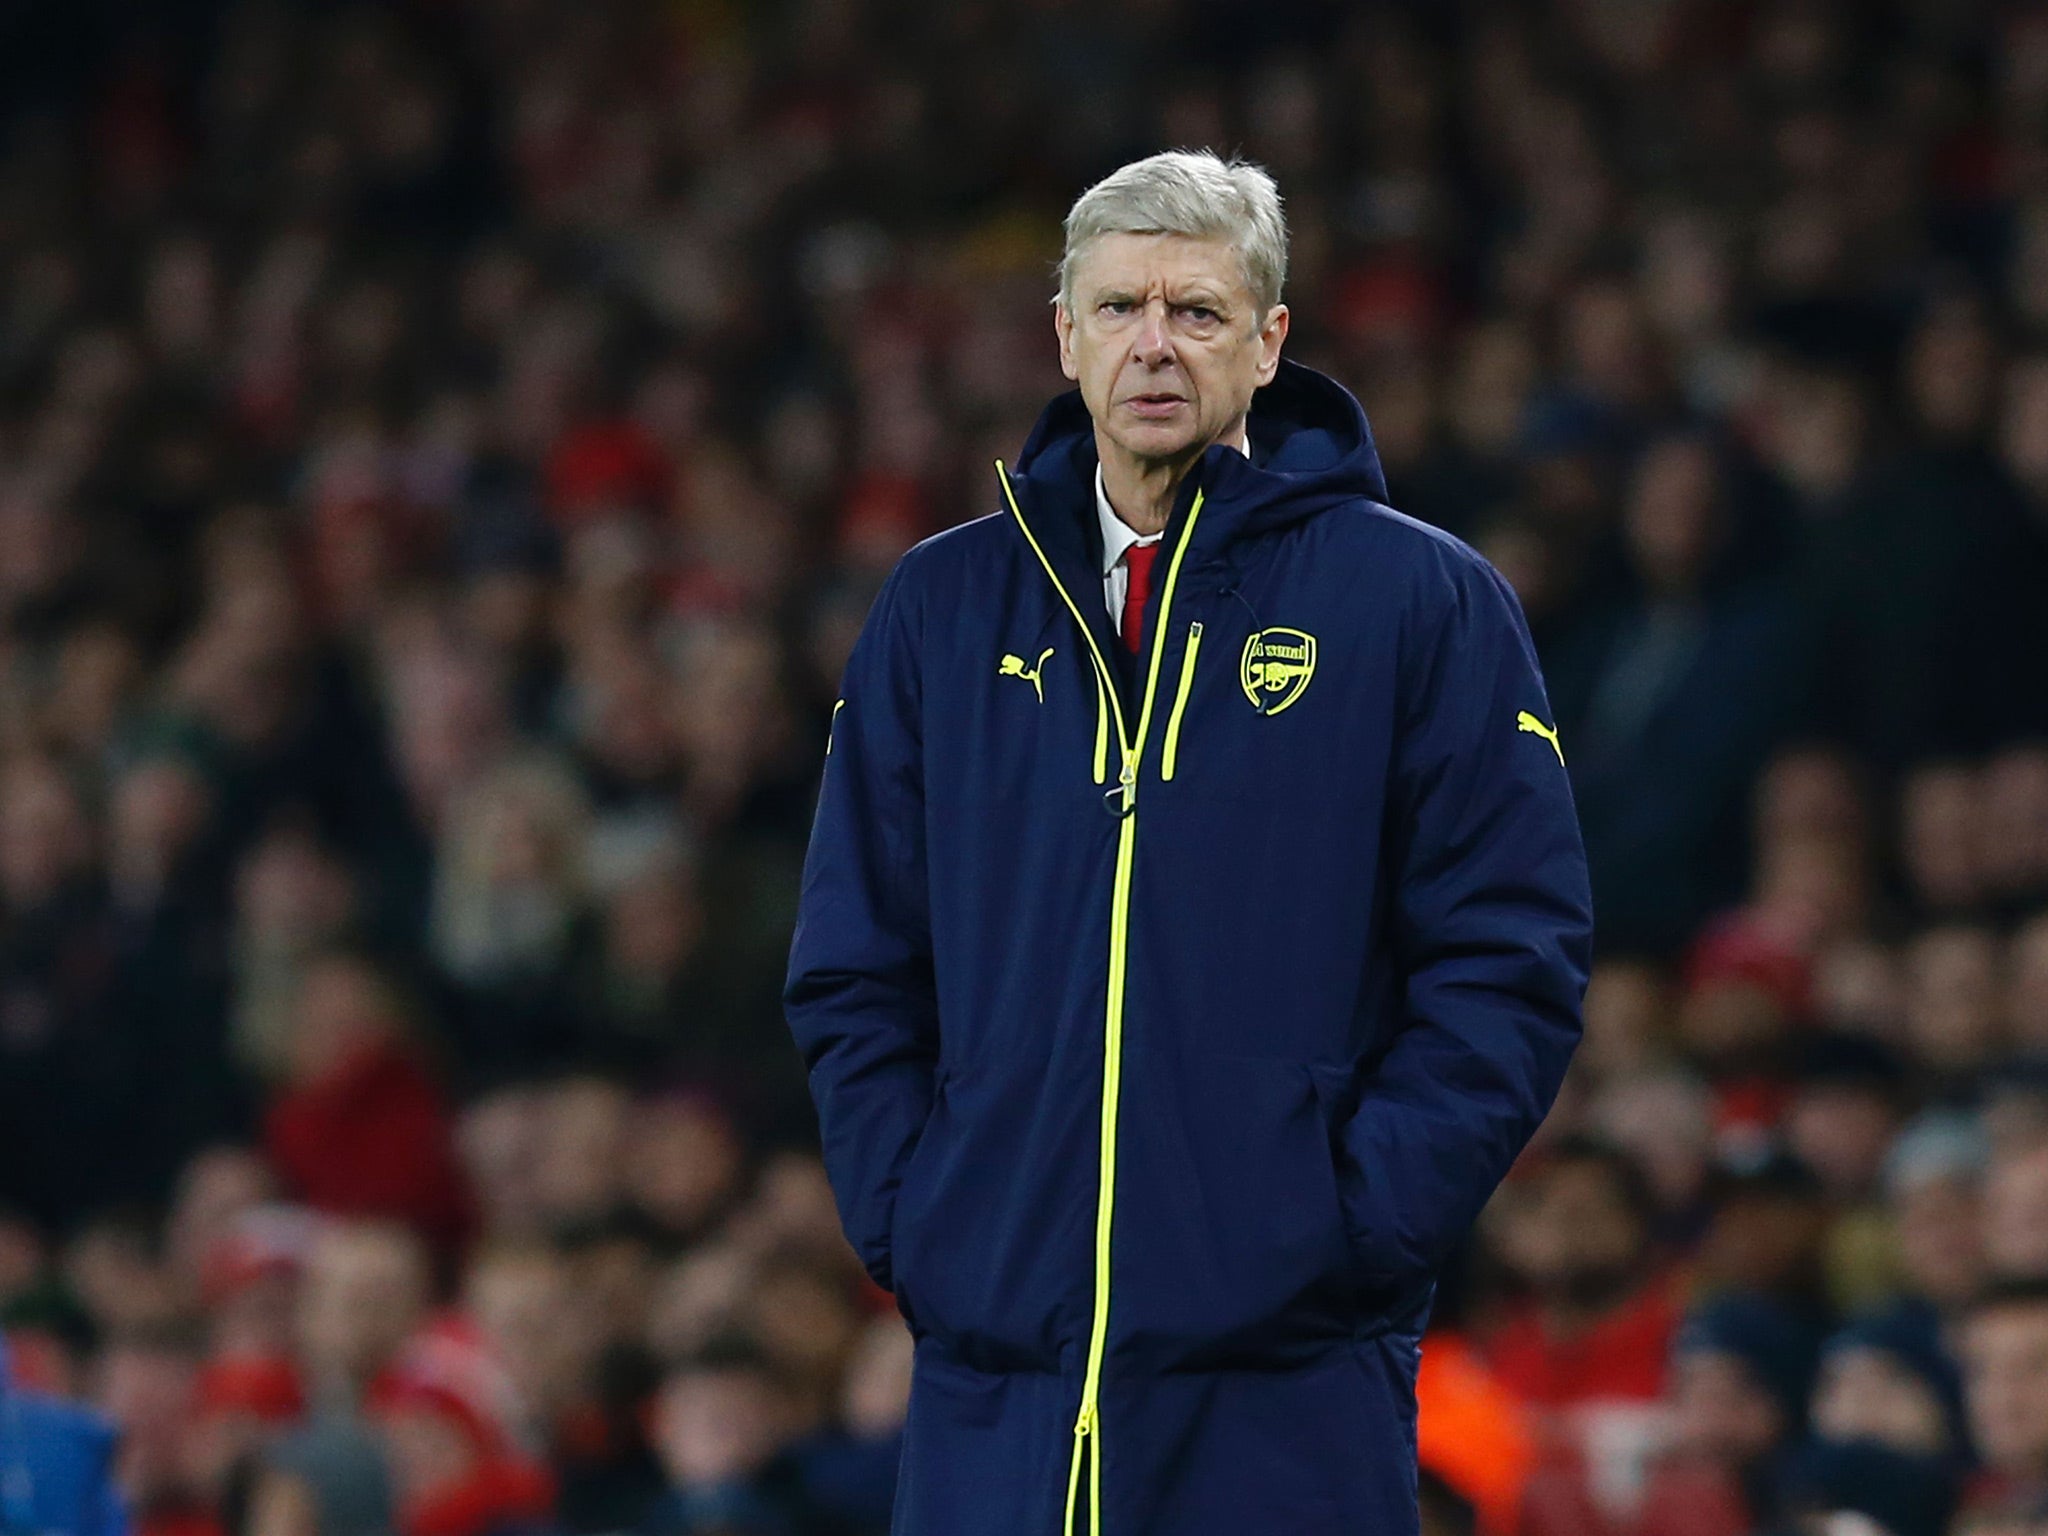 Wenger admits his side have lost some of their momentum over the last few weeks